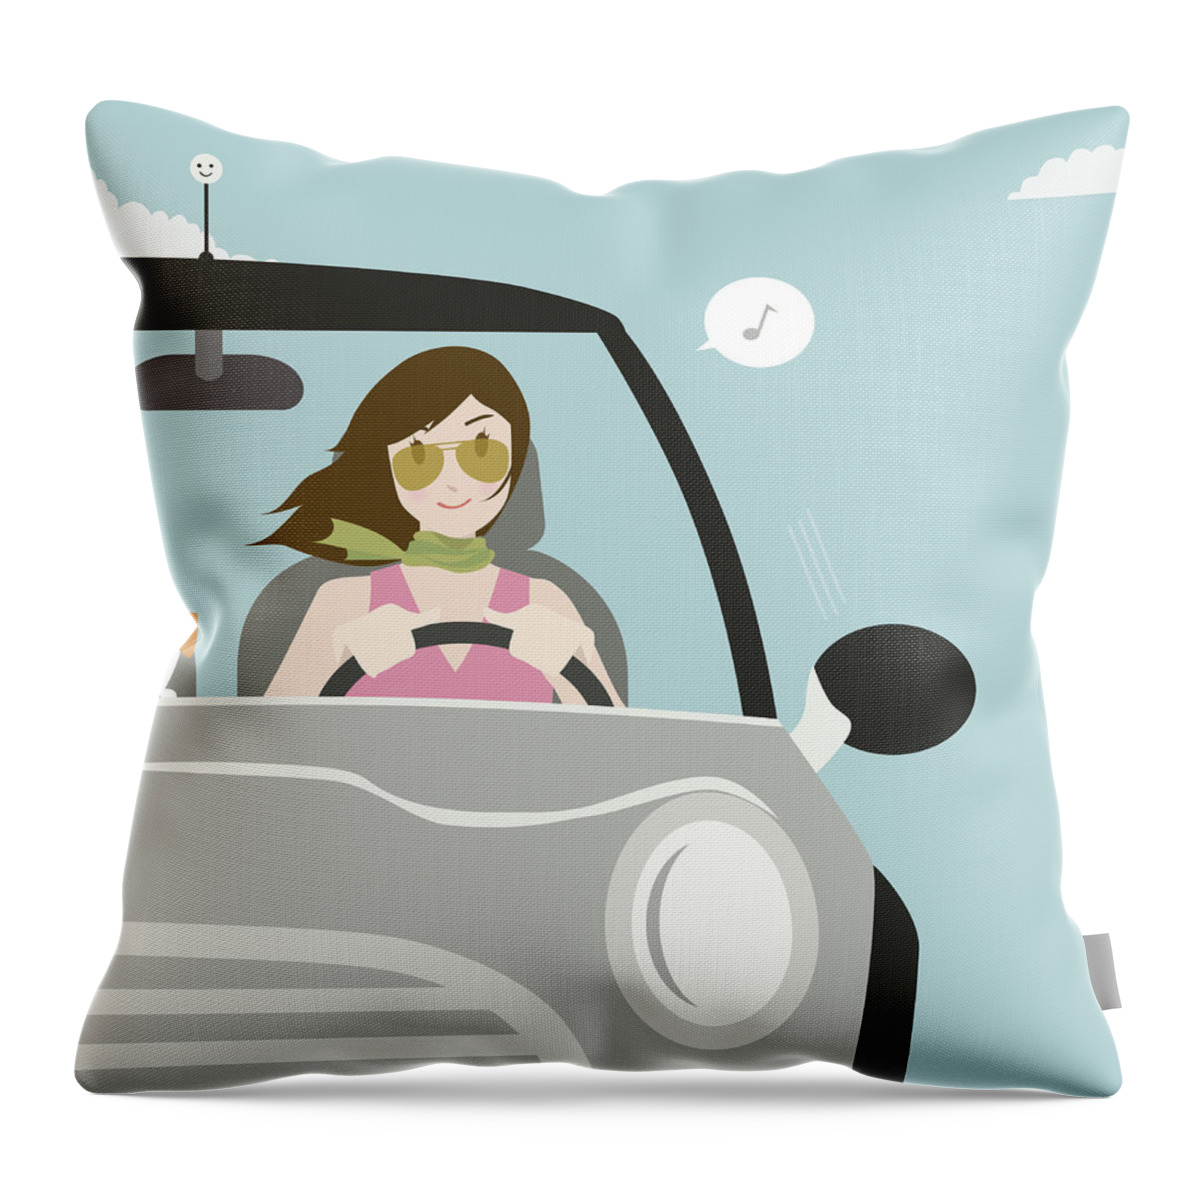 People Throw Pillow featuring the digital art Happy Motoring by Gollykim